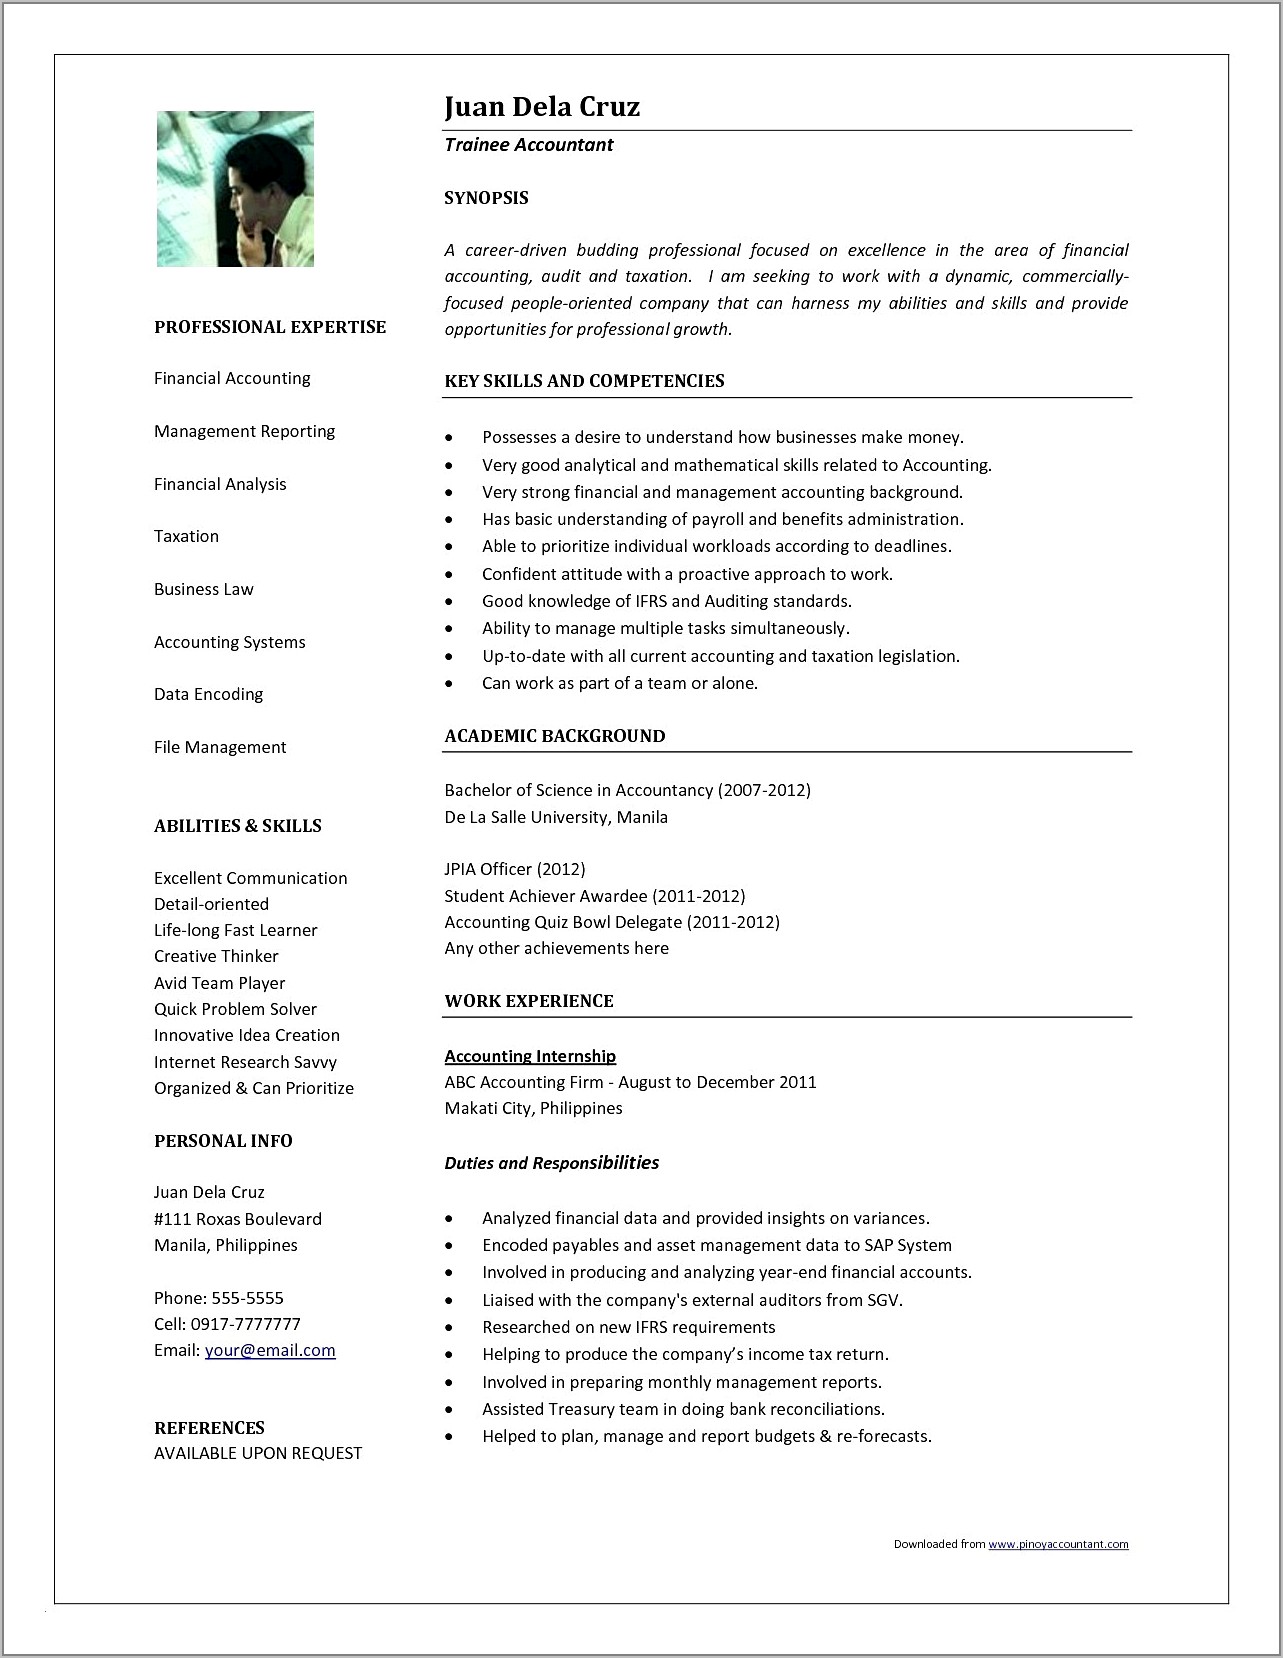 Professional Resume Format For Chartered Accountants